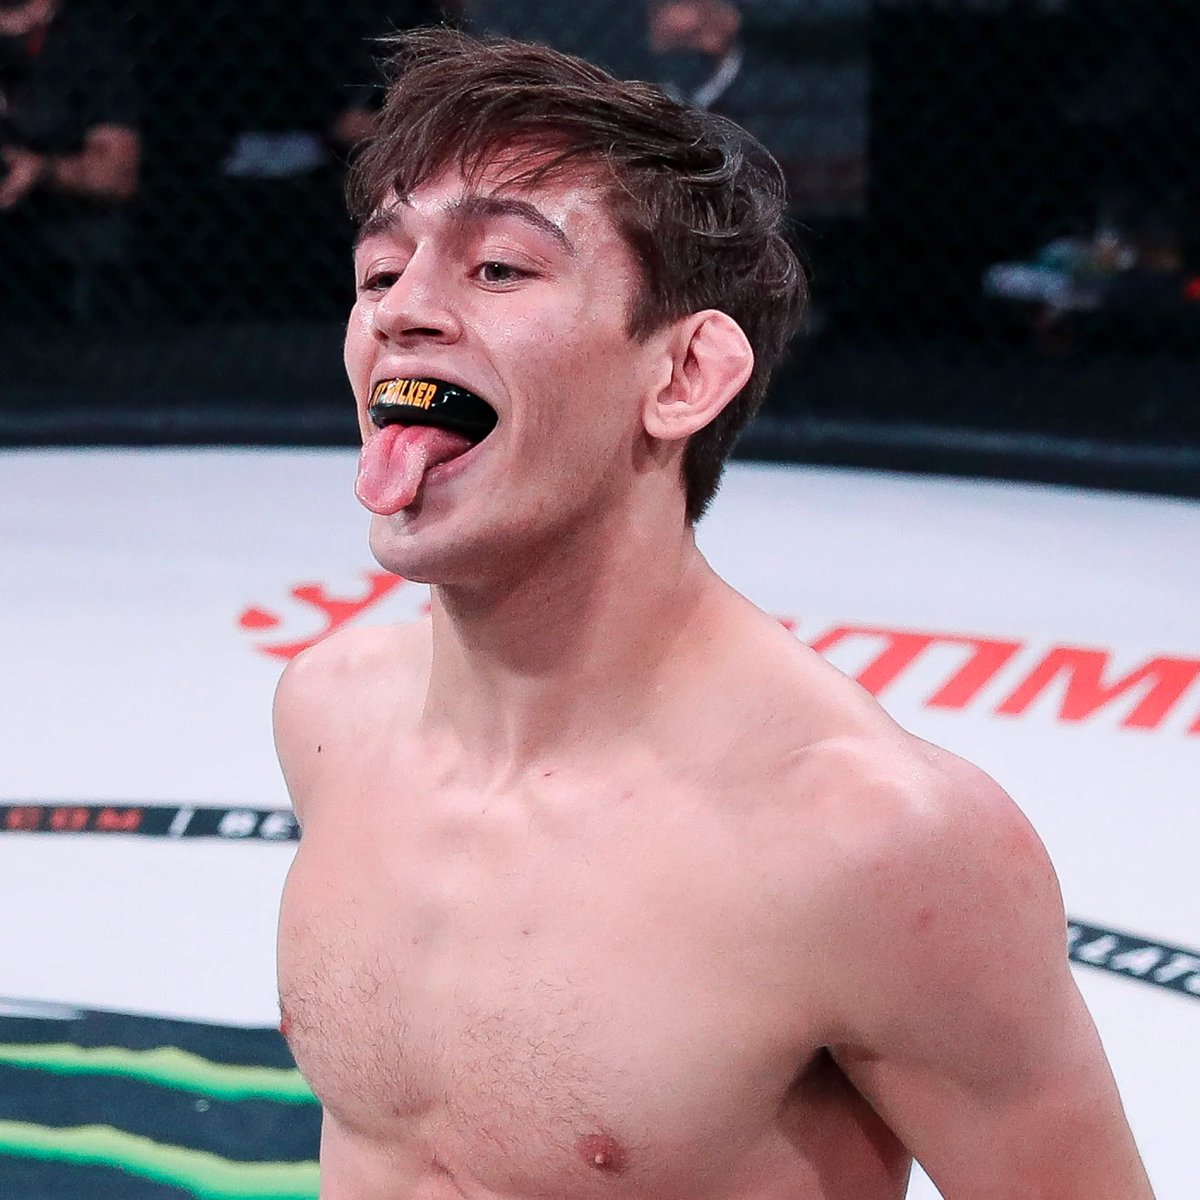 Bellator/PFL and featherweight Lucas Brennan (9-1) have parted ways, multiple sources say. Brennan, 23, enters free agency off his first pro loss after a 9-0 run Bellator that included eight finishes.